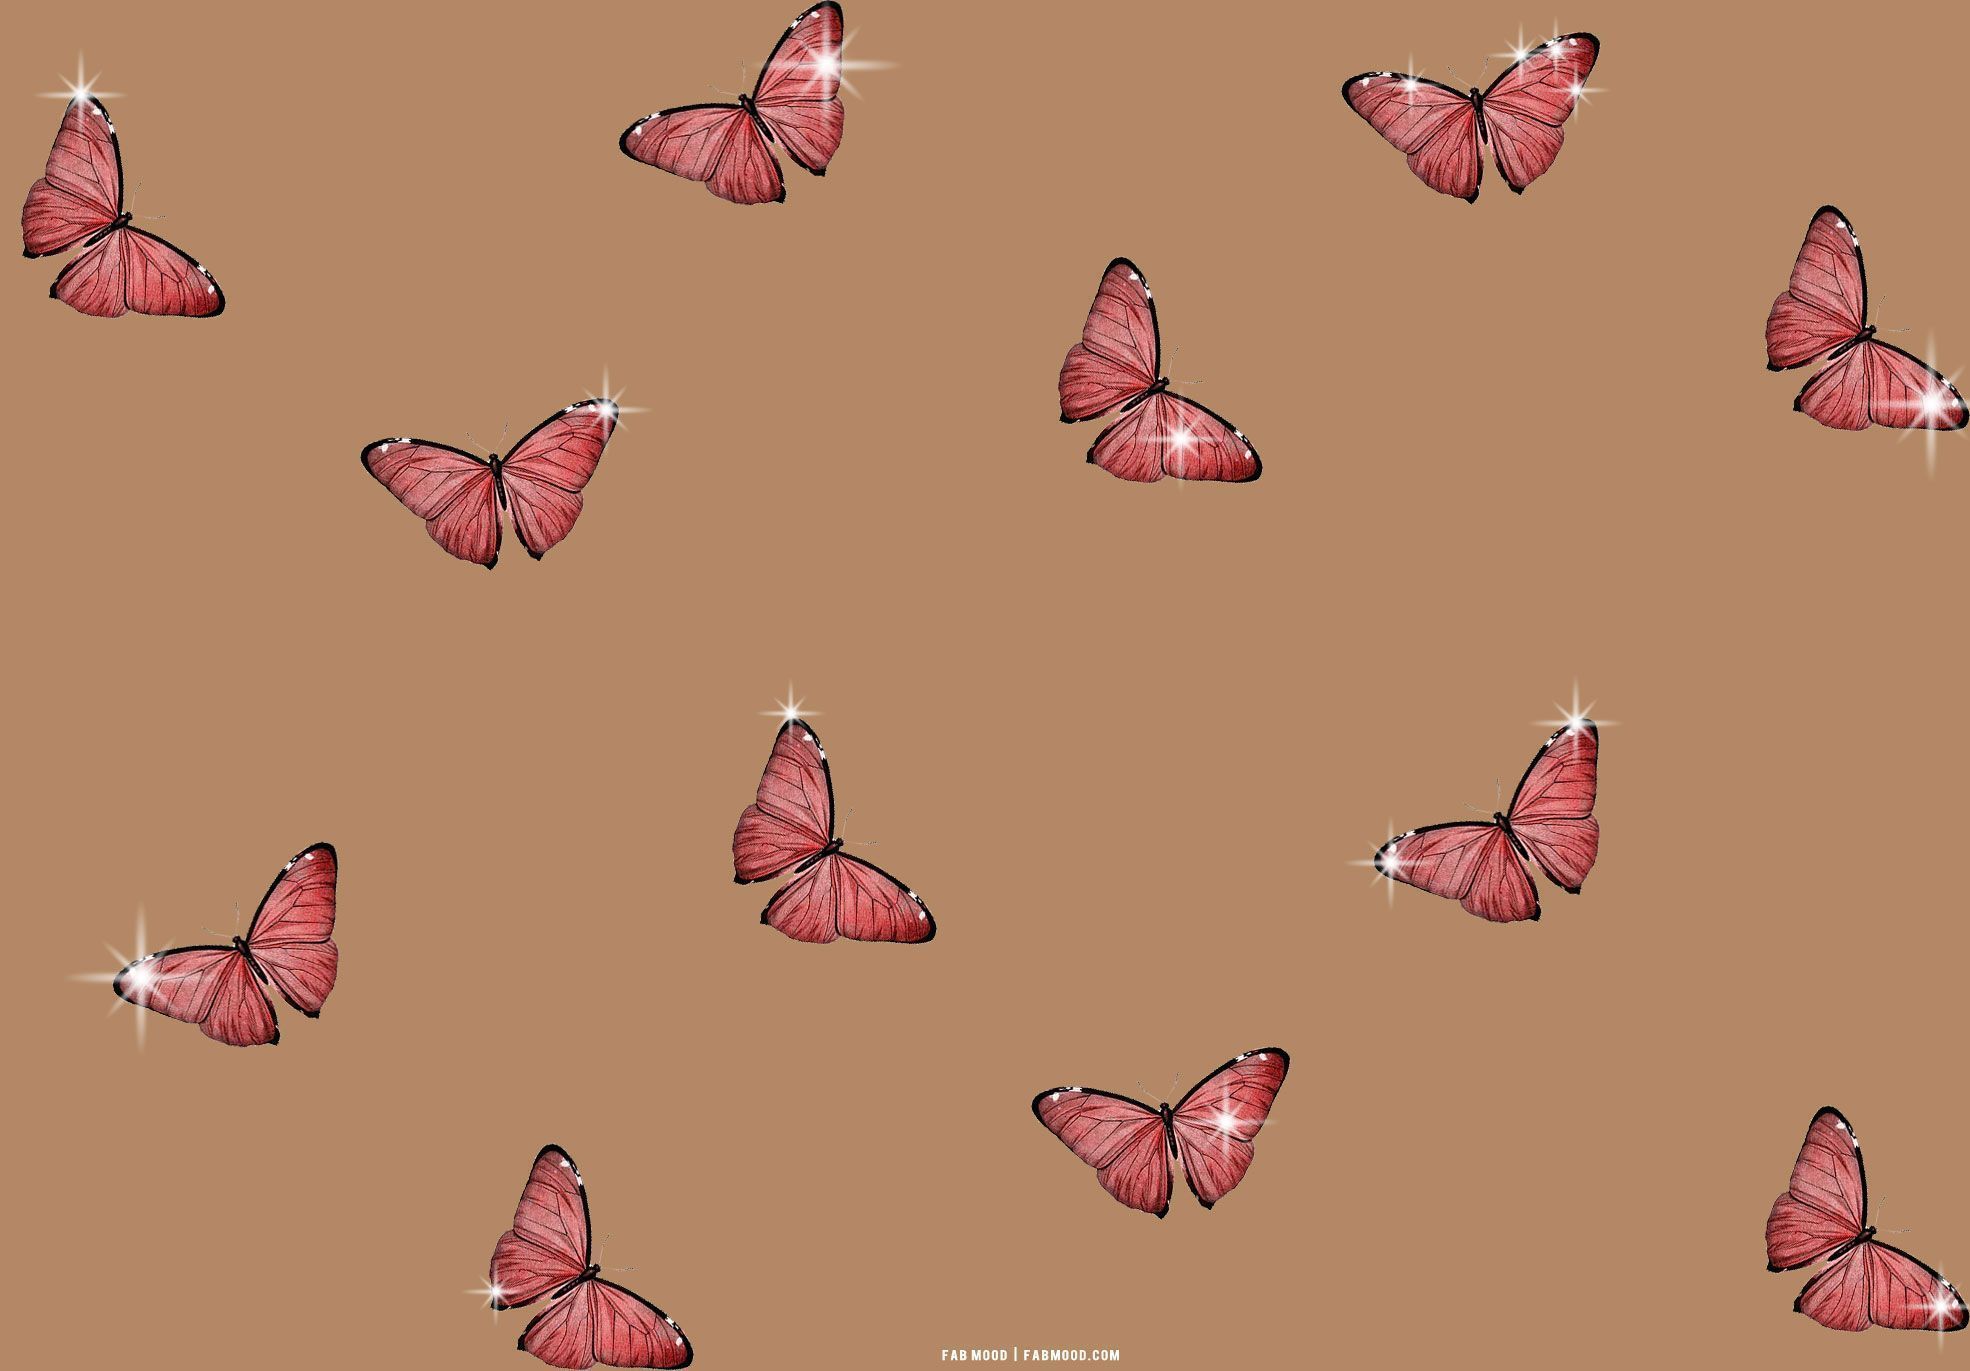 Brown Aesthetic Wallpaper for Laptop : Sparkle Butterfly Aesthetic Background